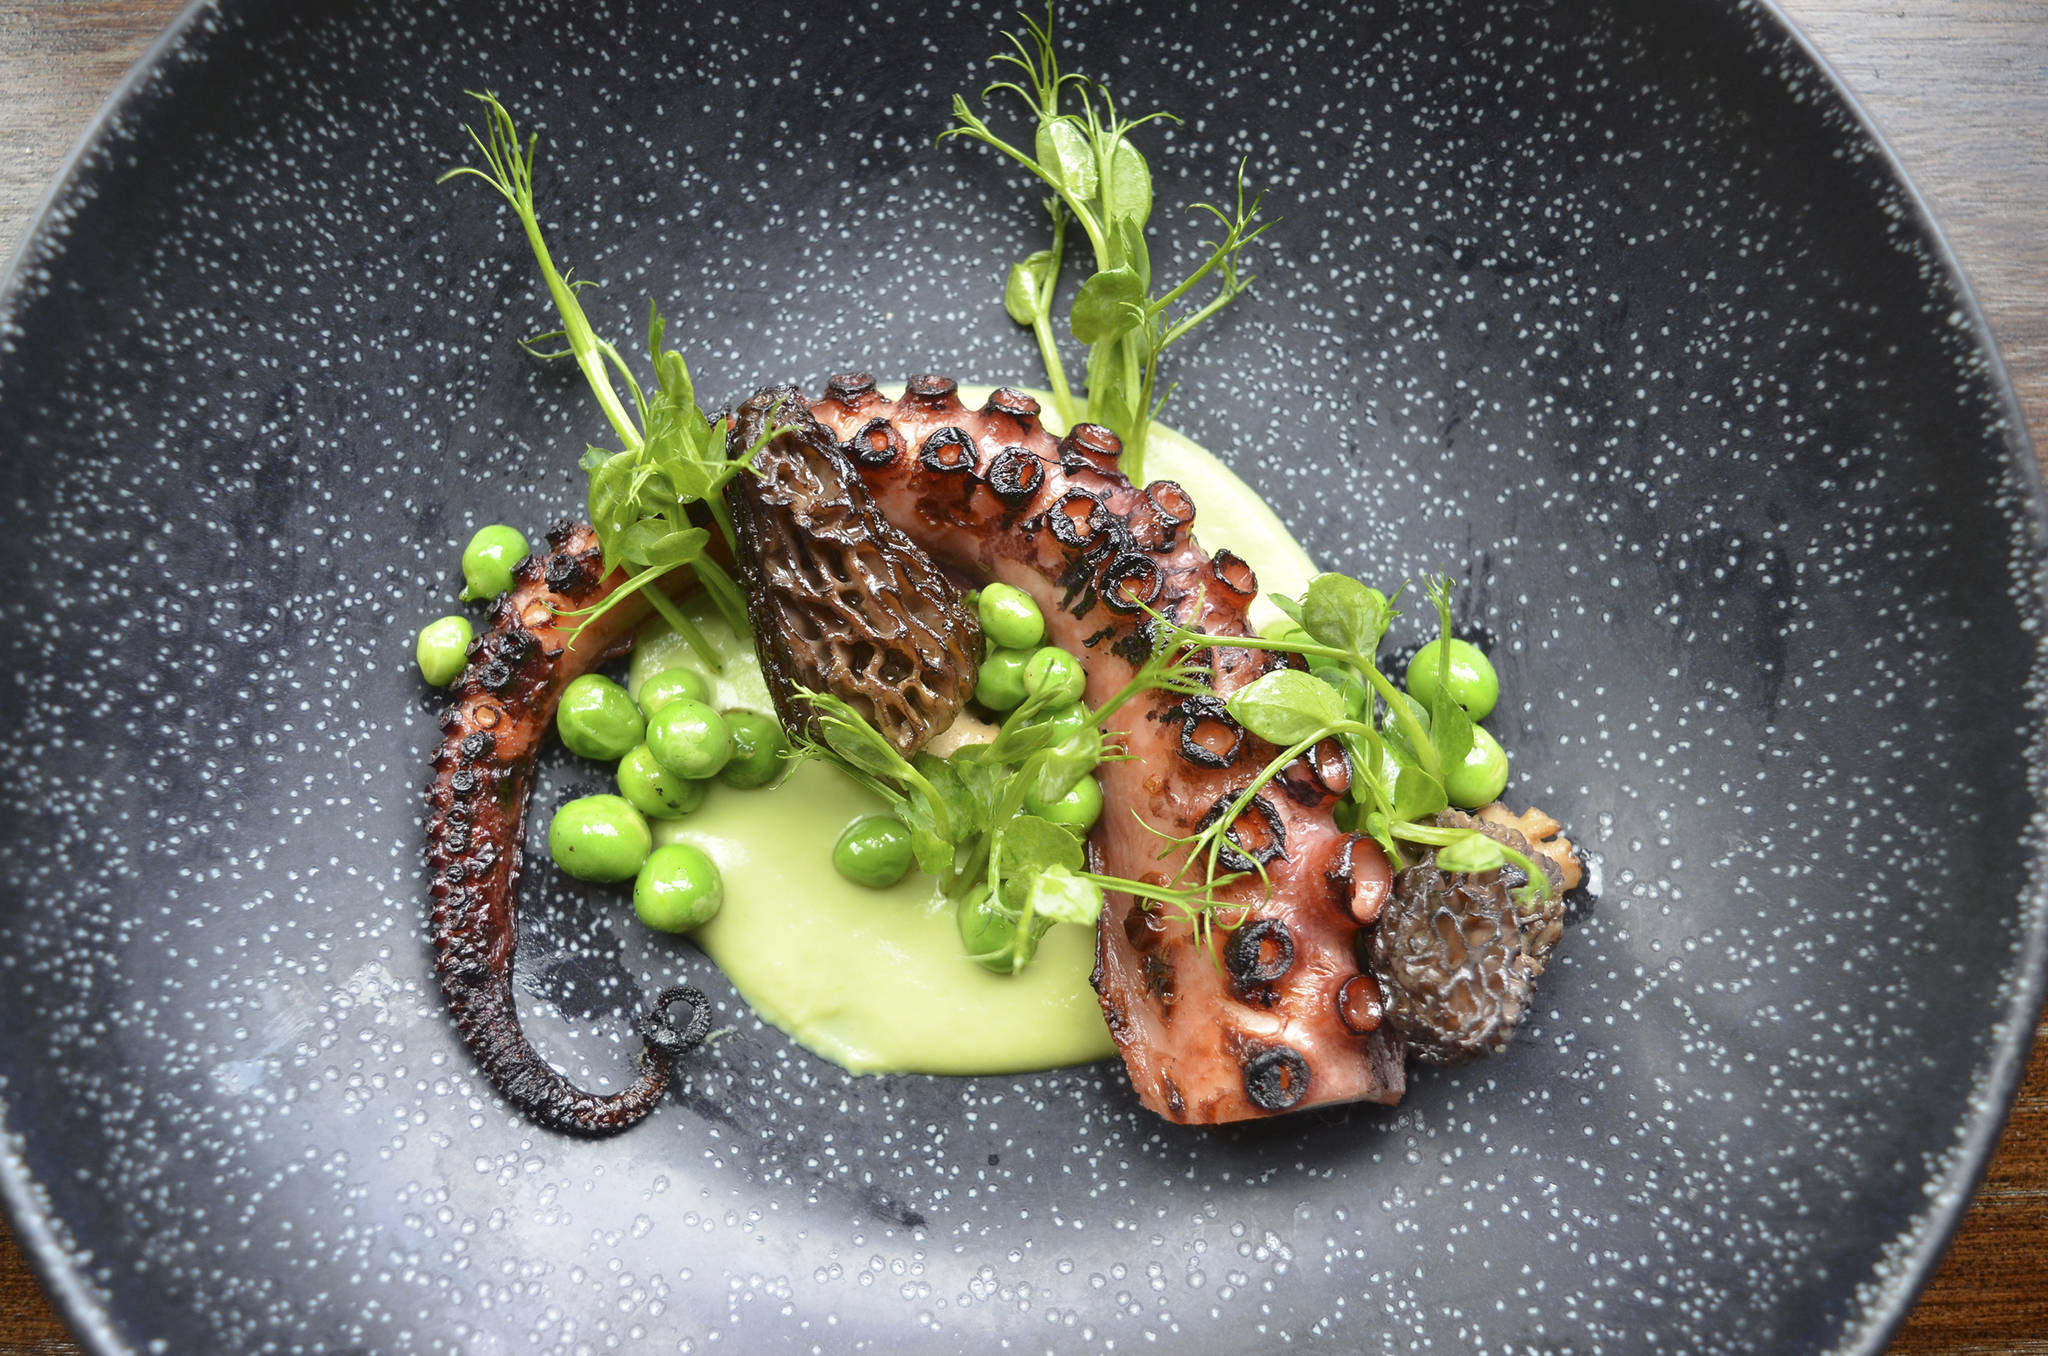 The succulent octopus with pea purée. Photo by Shota Nakajima